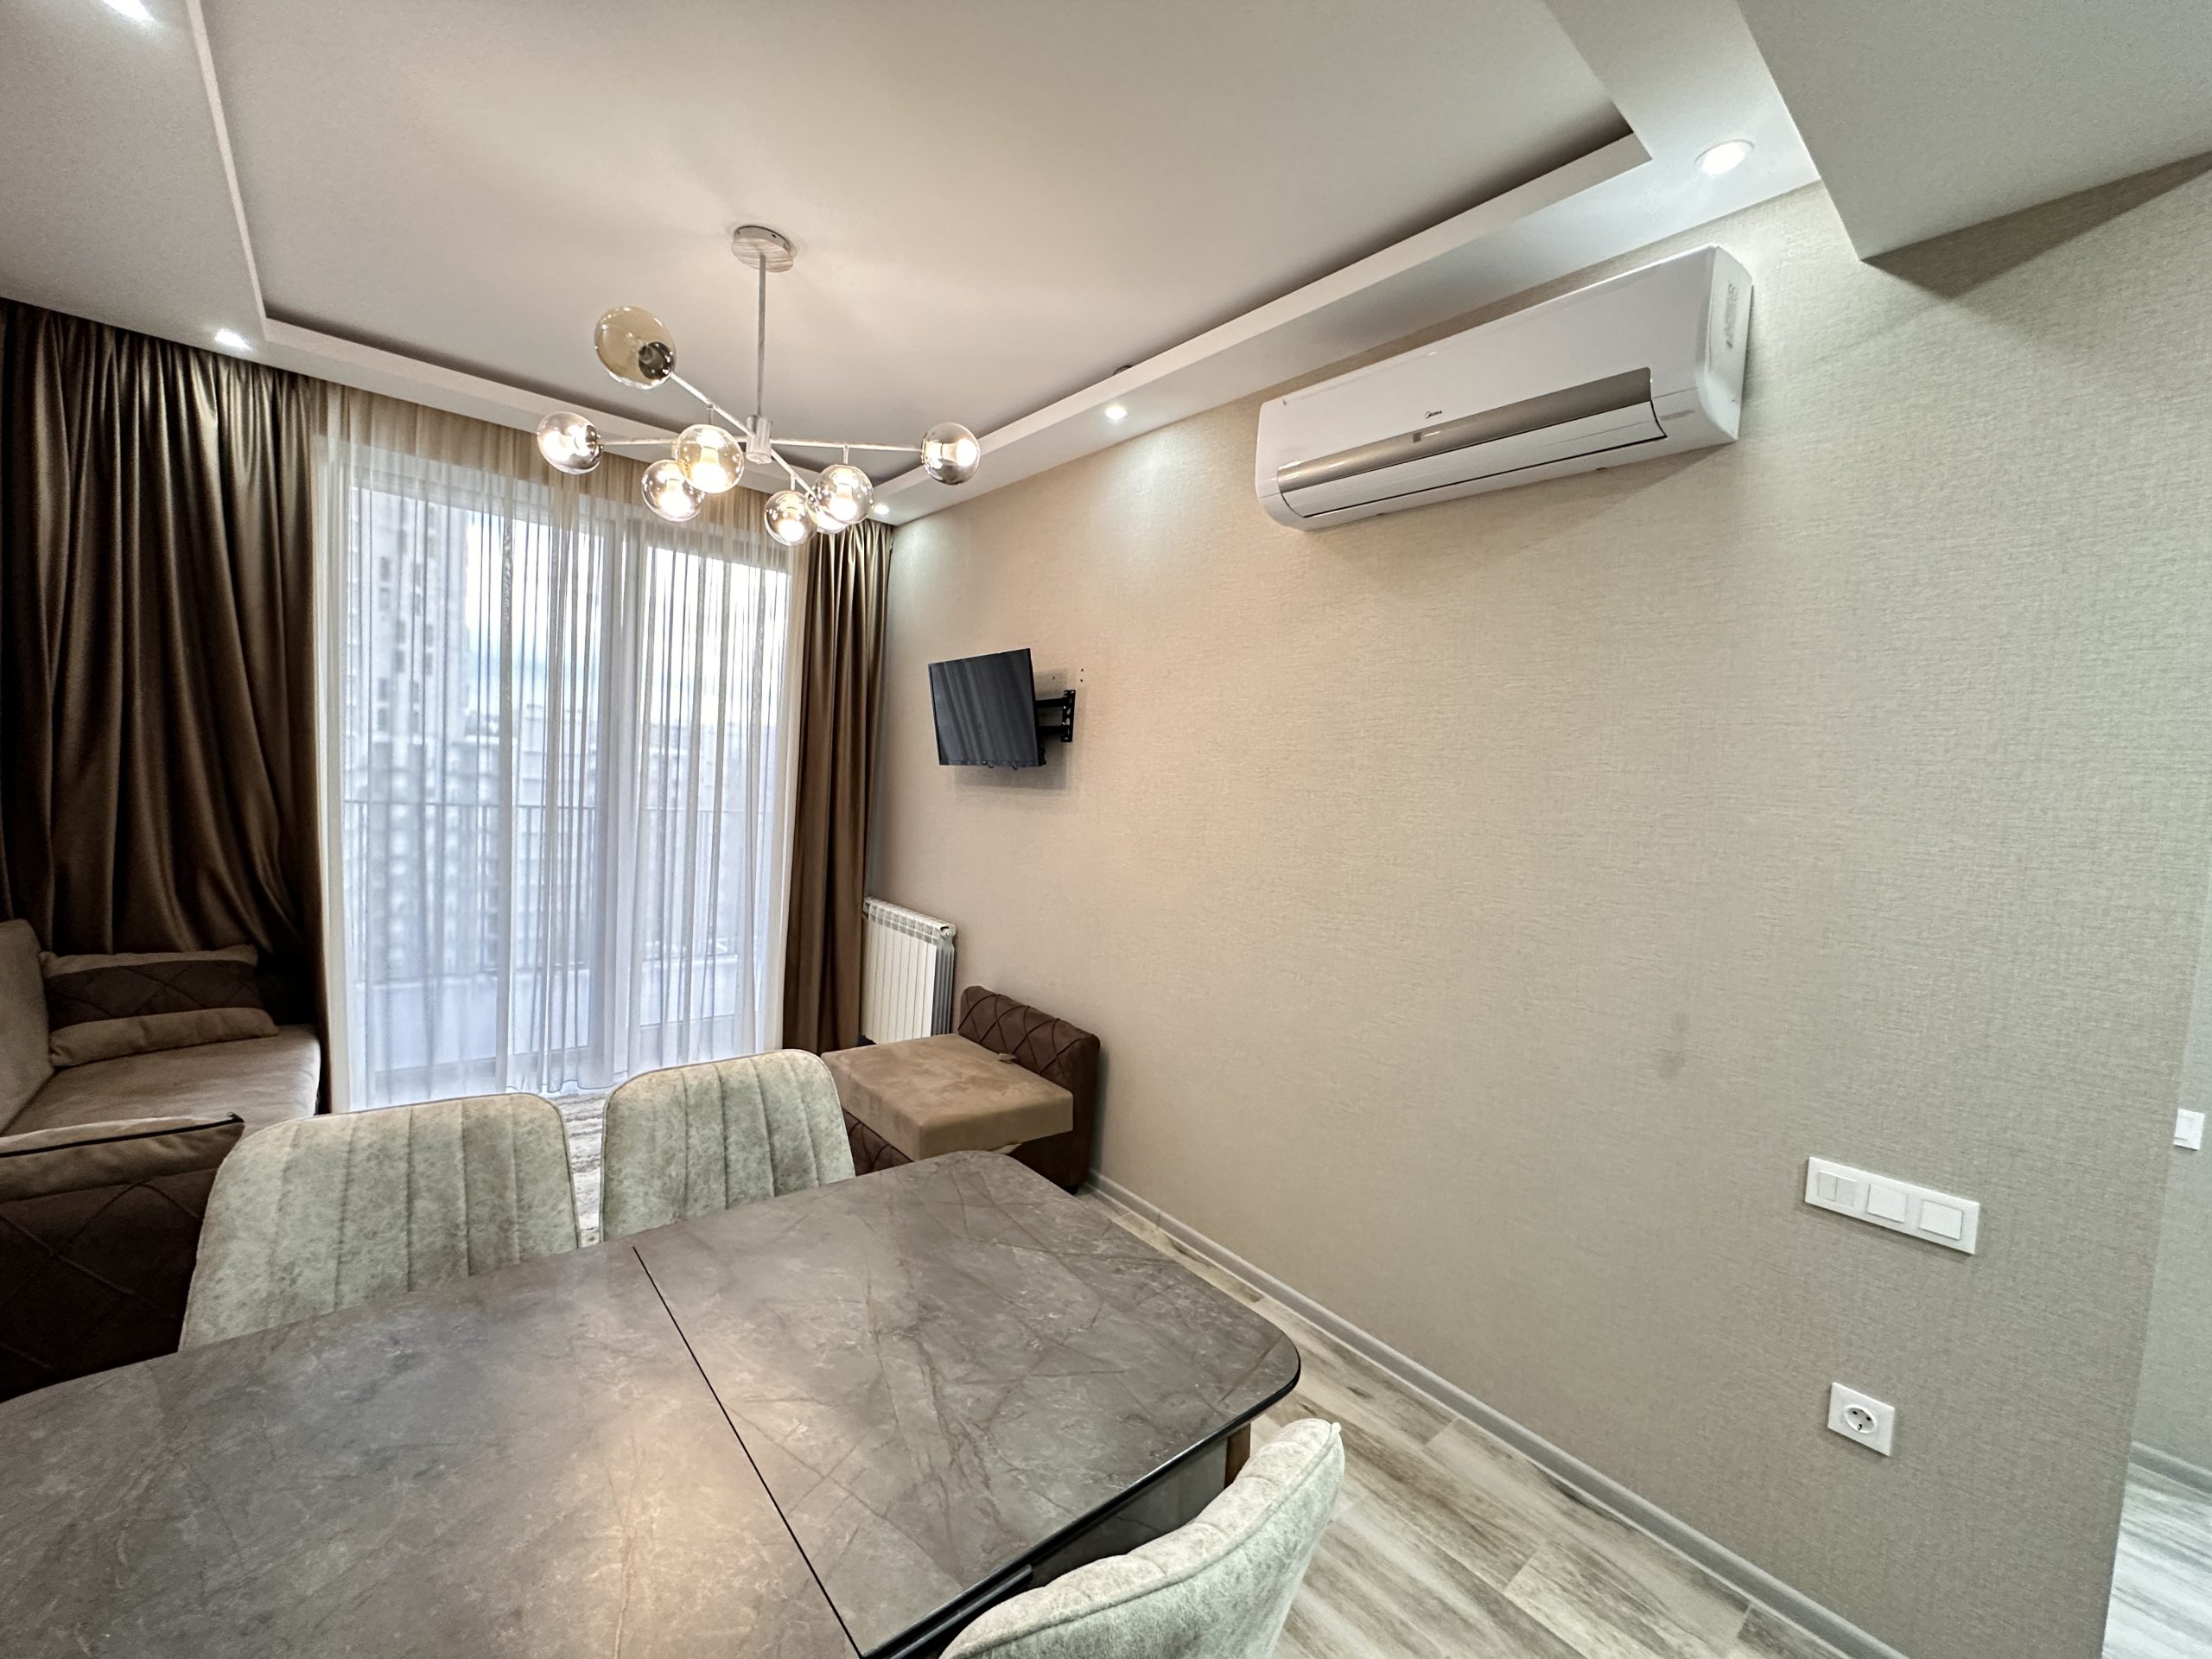 2-Room Apartment For Rent In “Archi Central Park” at Hippodrome